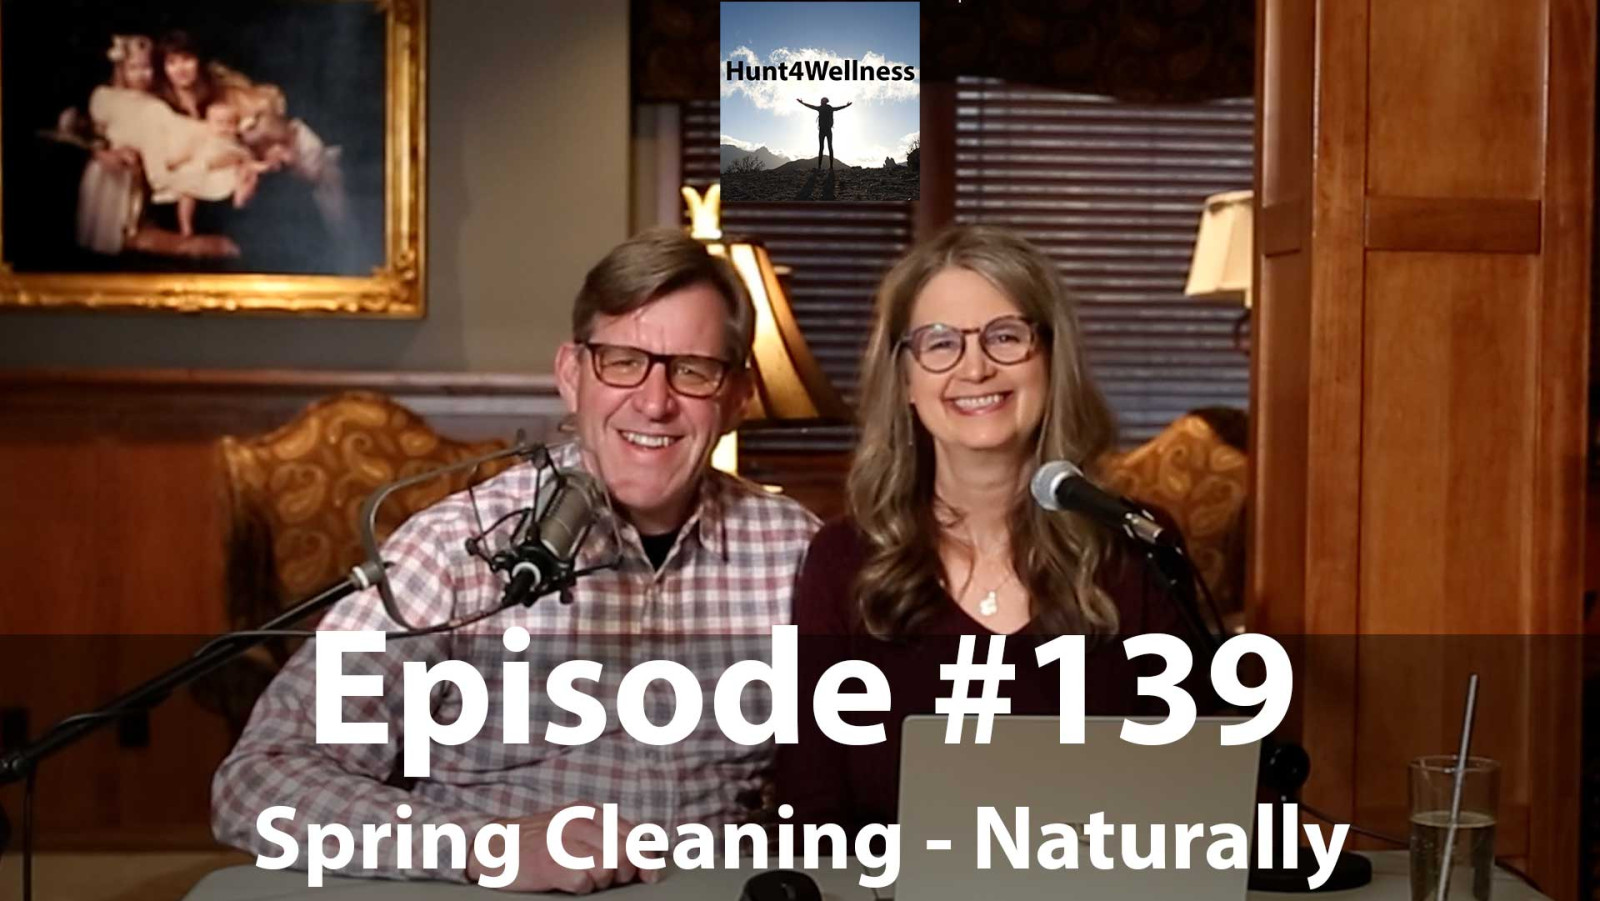 Episode #139 - Spring Cleaning - Naturally